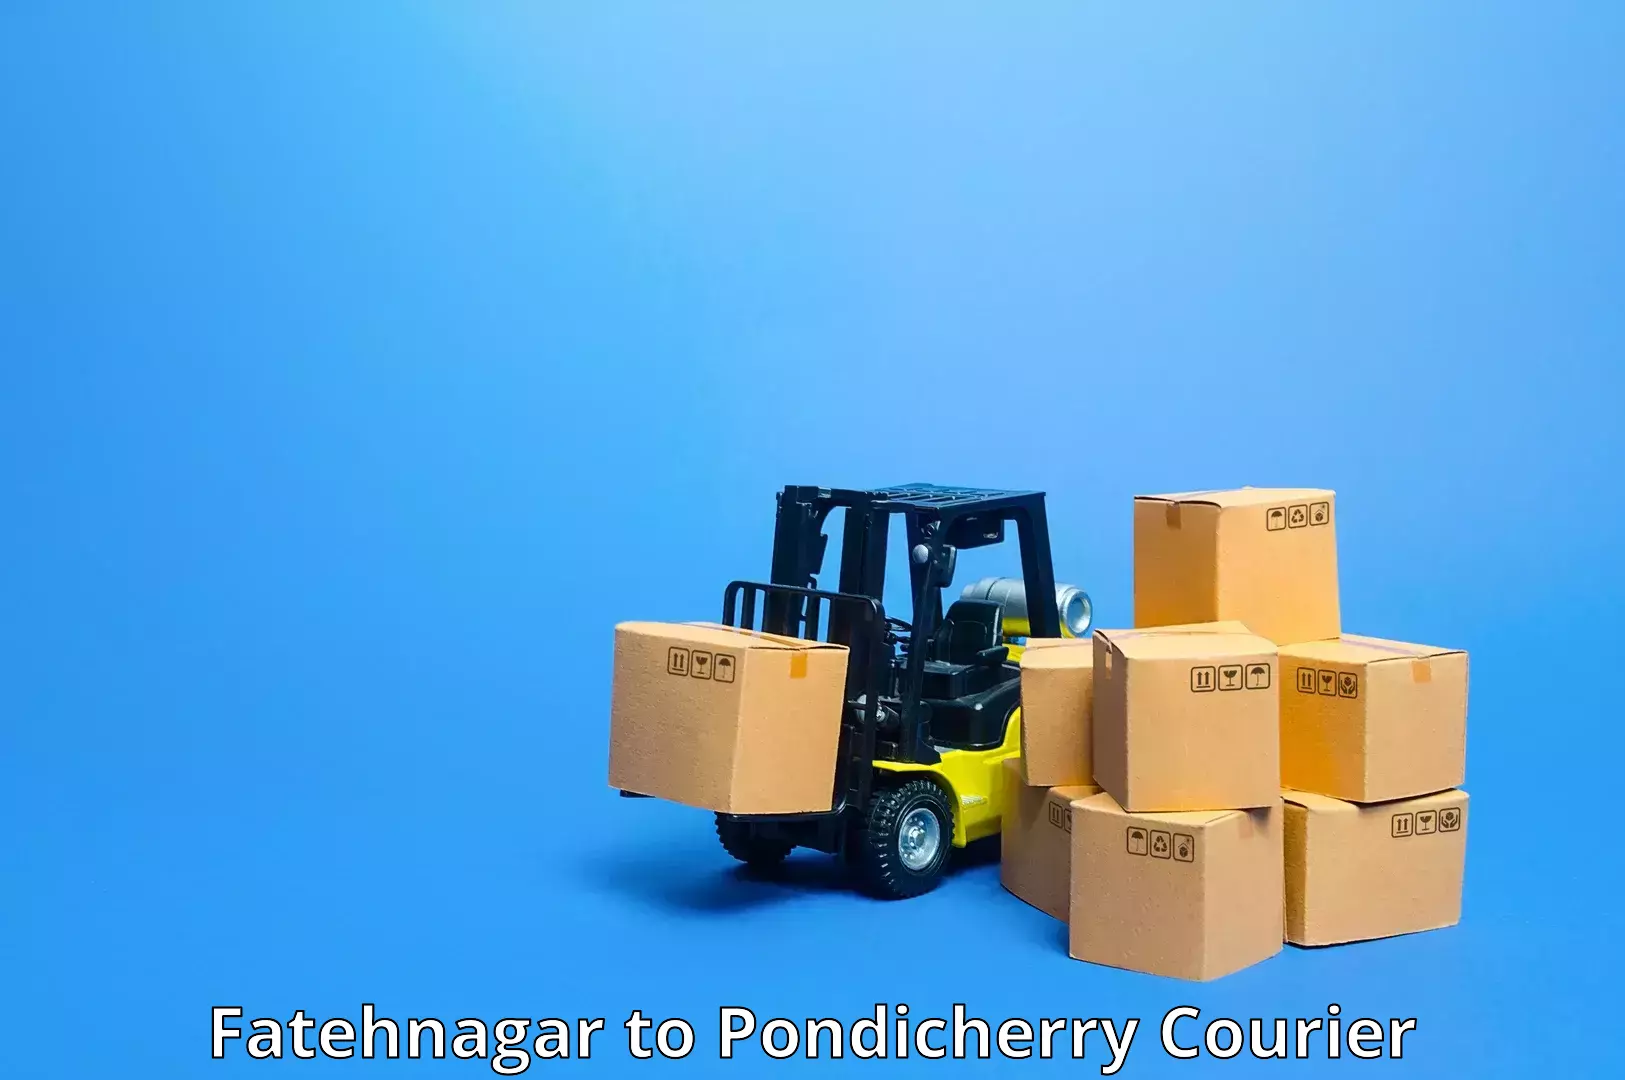 Customizable delivery plans Fatehnagar to Metttupalayam